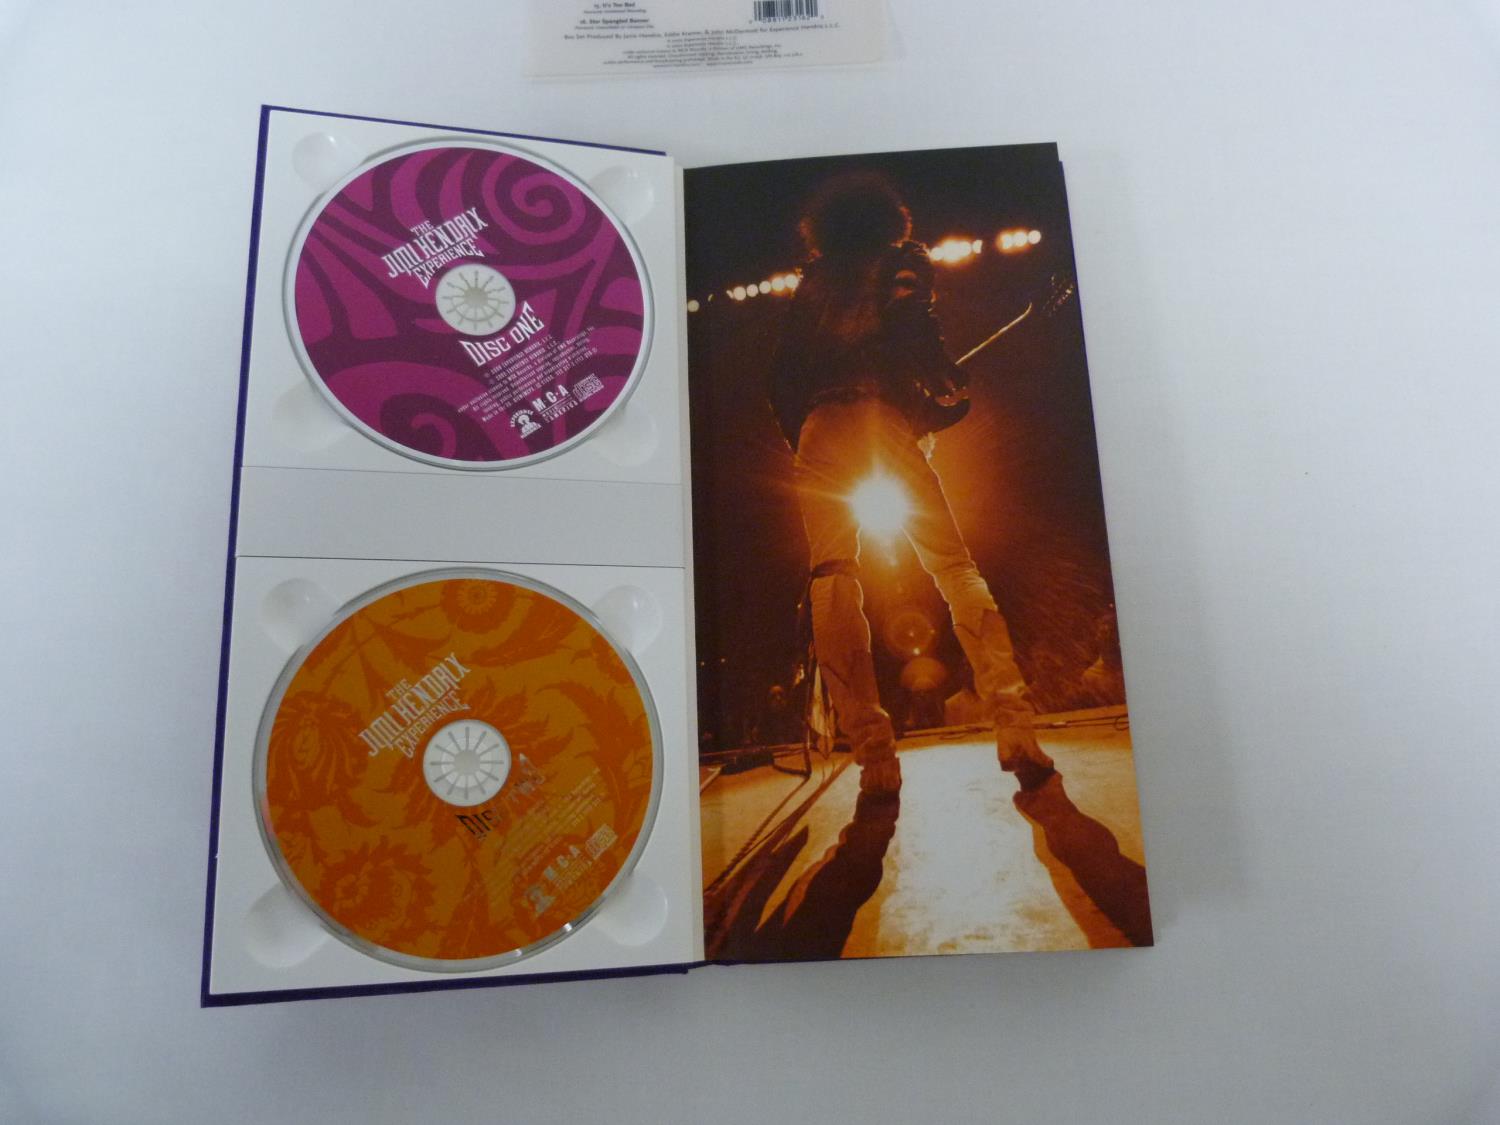 The Jimi Hendrix Experience, 4 CD set in purple velvet sleeve. Manufactured in 2000, made in the EU. - Image 3 of 3